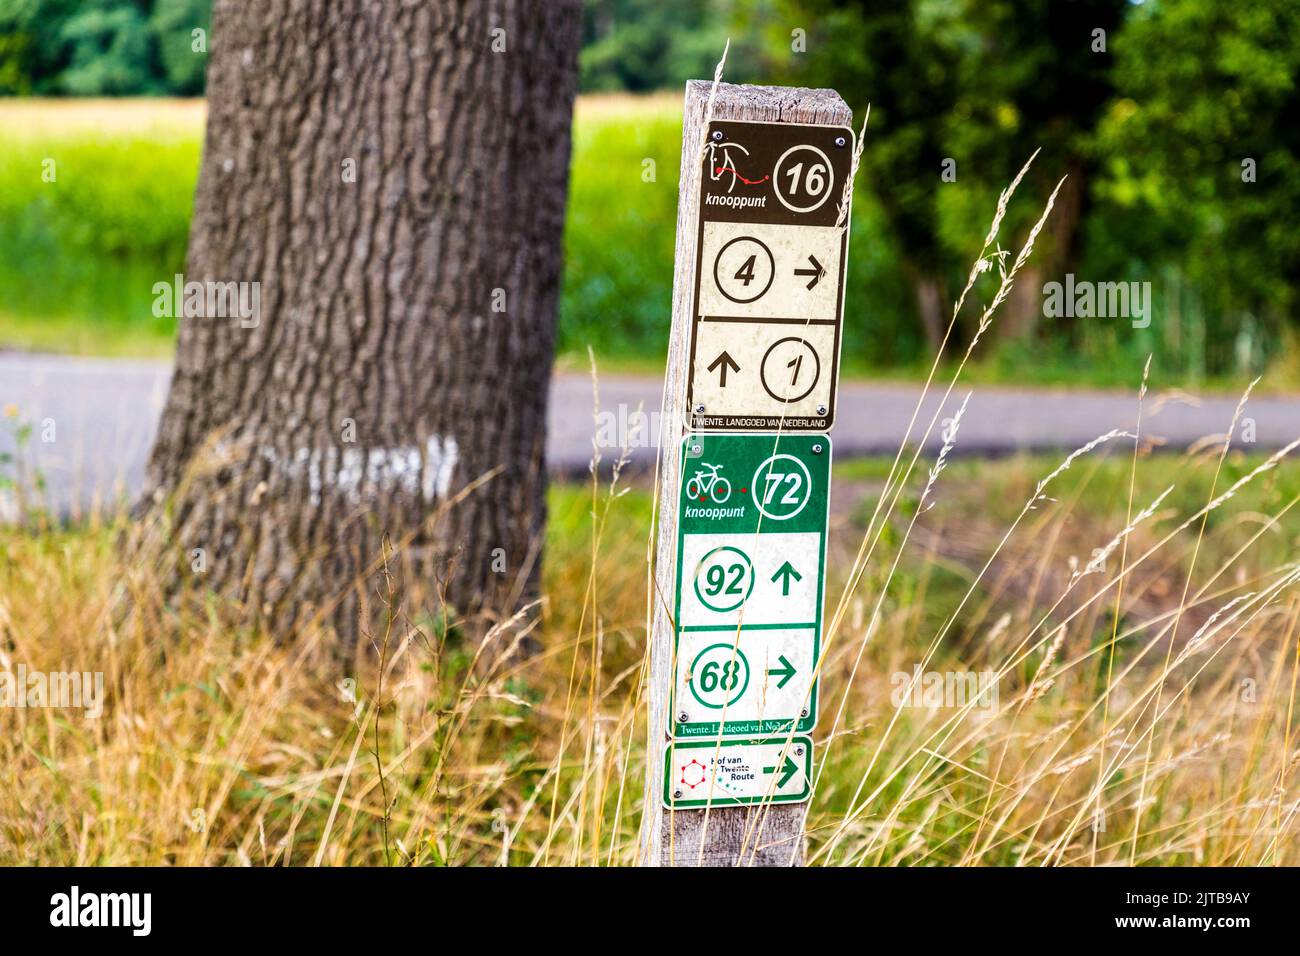 In the Hof van Twente region there is a wide range of cycling and hiking trails. The region is also called 'The Gardens of the Netherlands'. The nodes mark crossings where cyclists or walkers can extend their routes. You have to be well prepared to understand the Dutch signs on bike paths. Ambt Delden, Netherlands Stock Photo